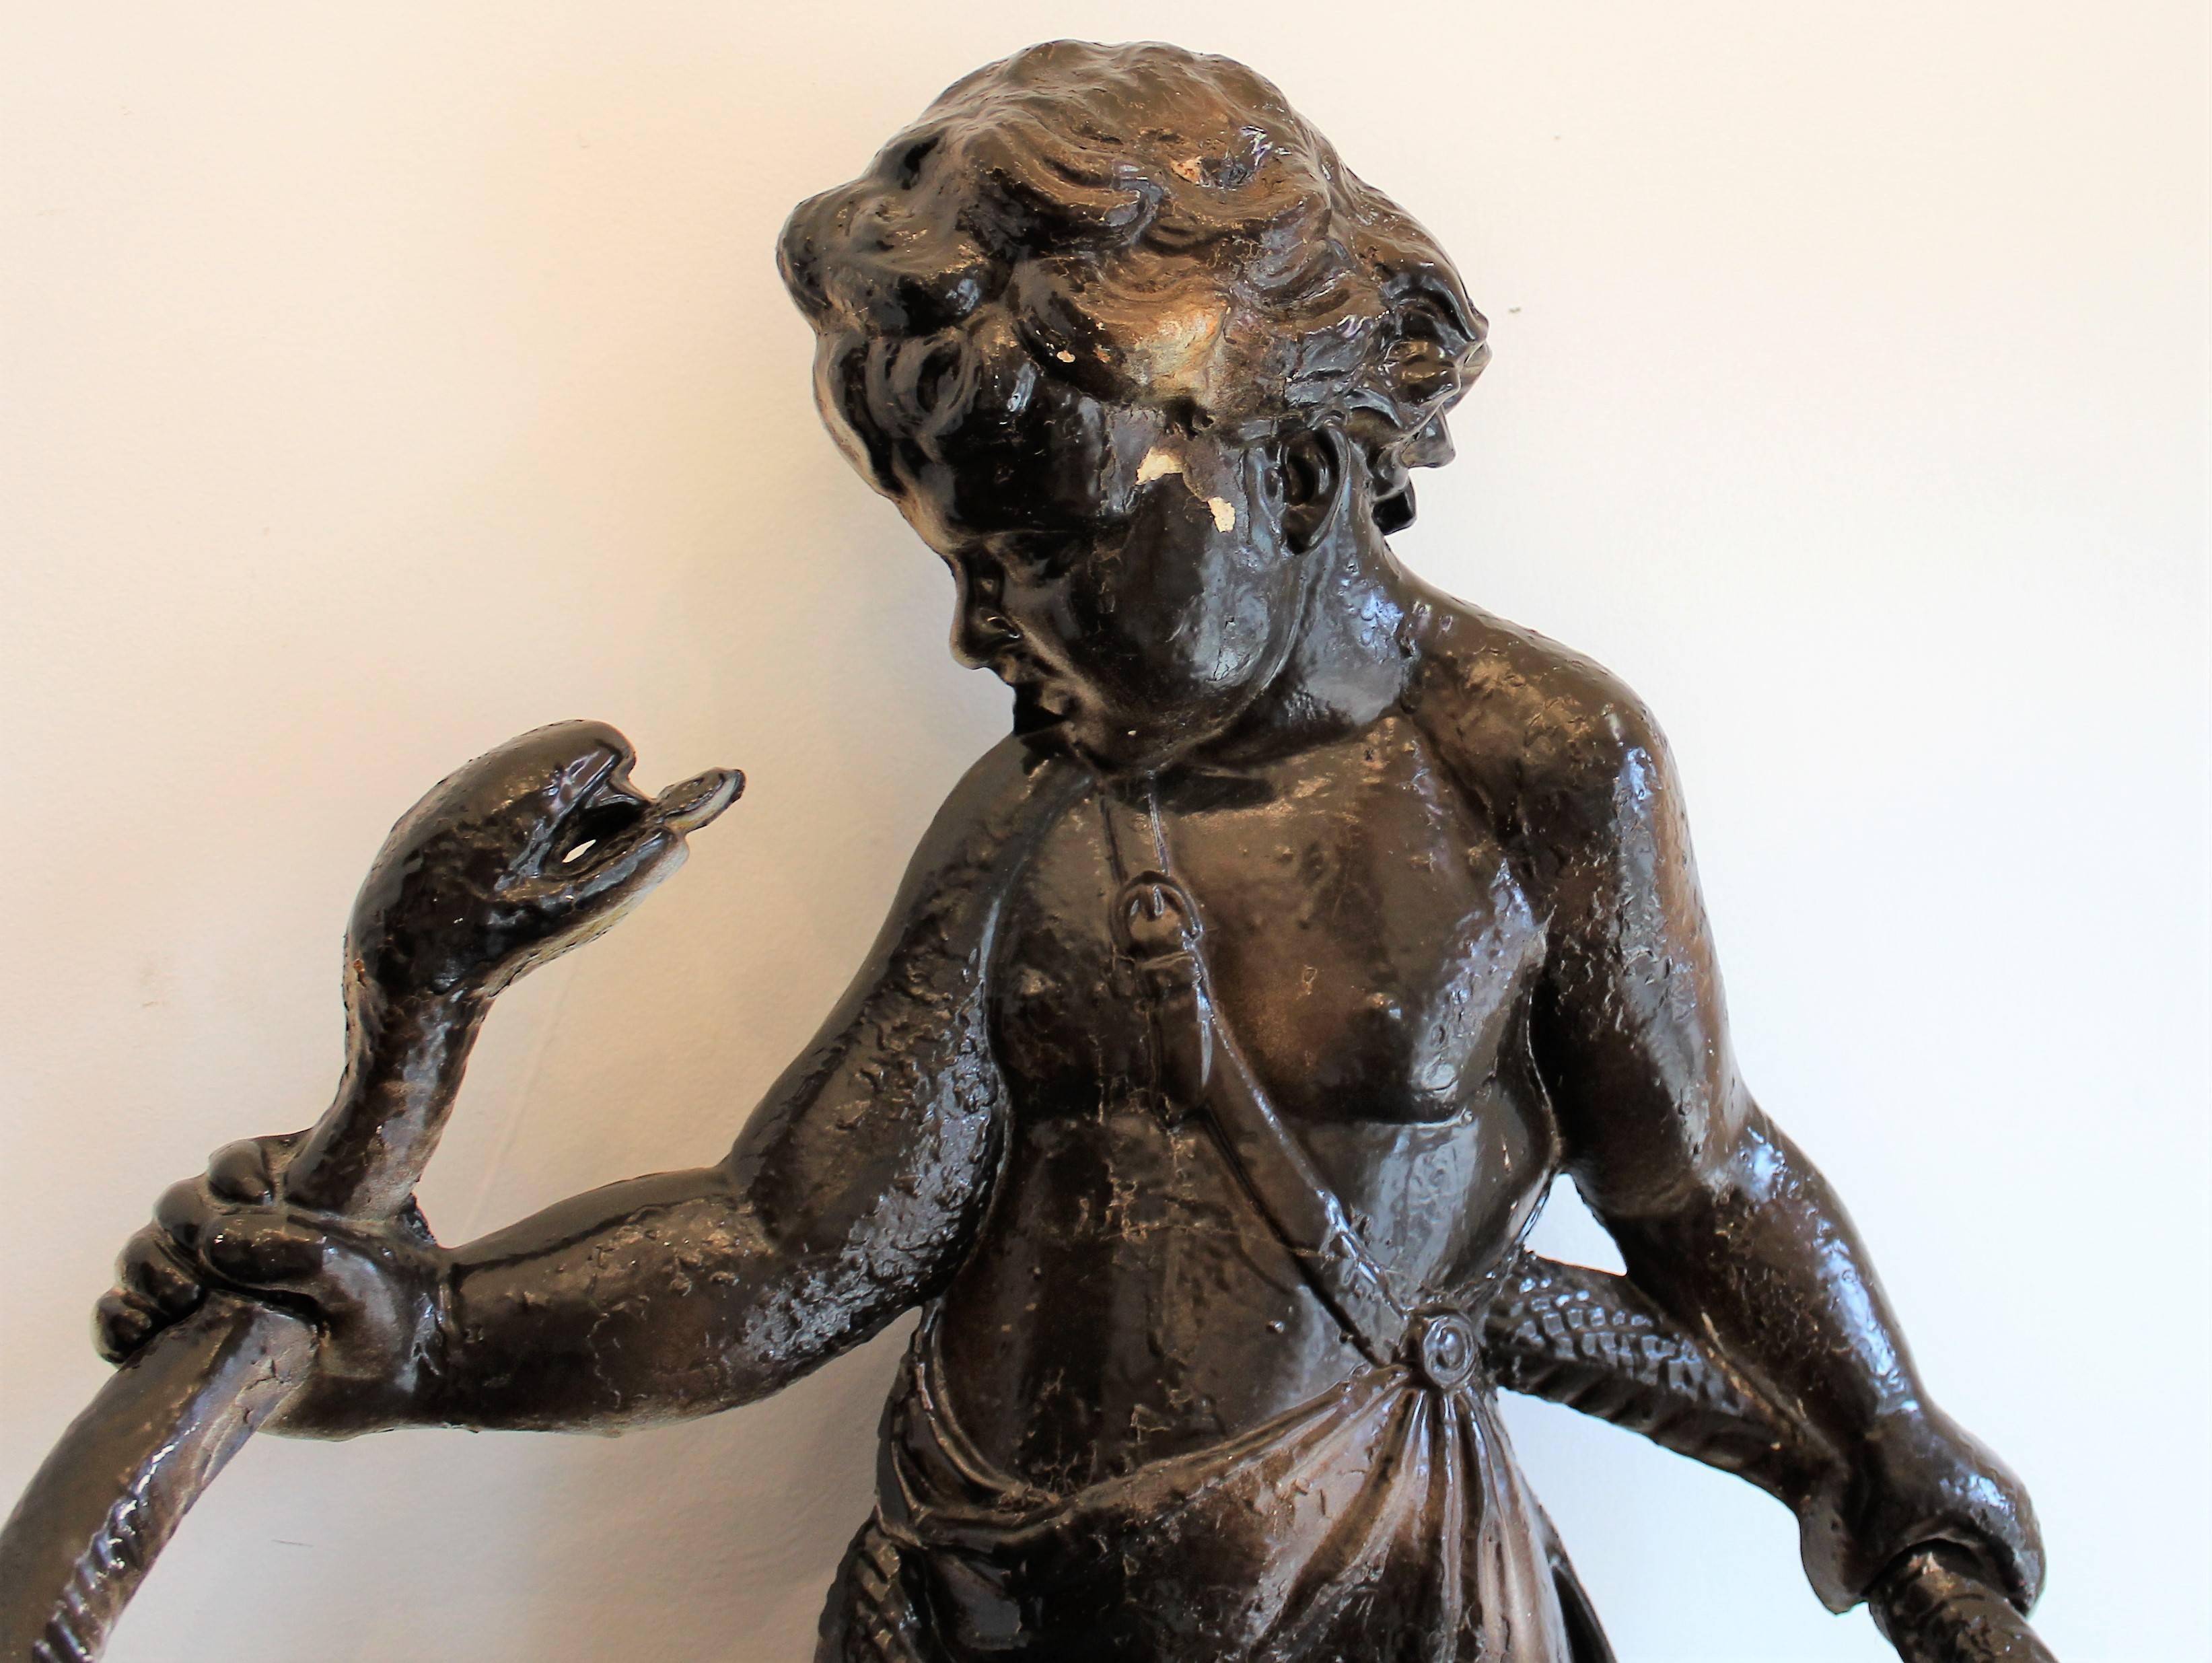 Victorian English Cast Iron Umbrella Stand Depicting the Baby Hercules